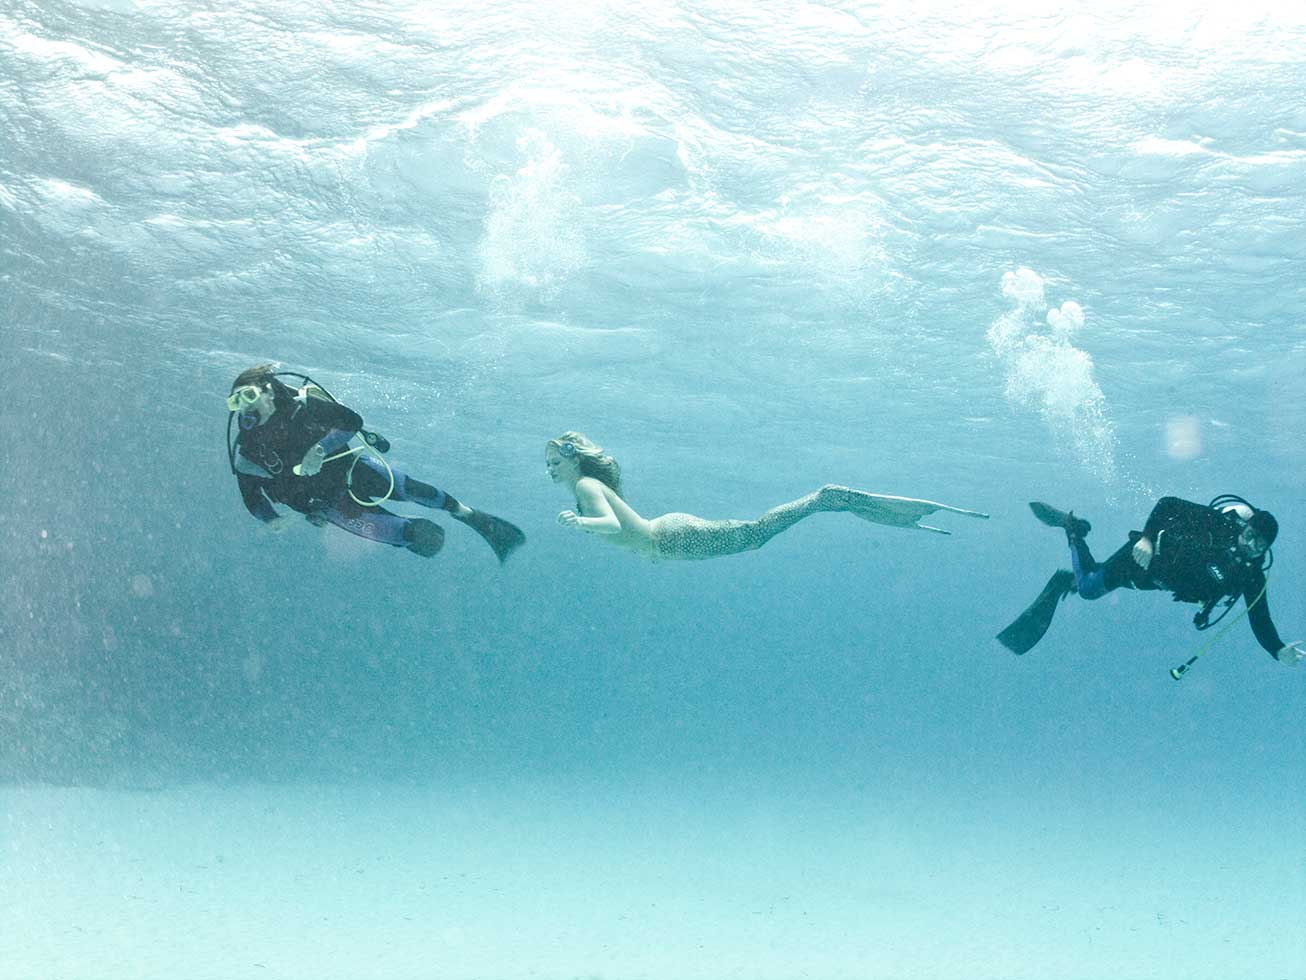 So thats how they do it! Divers swim rapidly out of shot to clear frame before the photographer snaps the picture whilst the mermaid hangs gracefully in the ocean tied to a breeze block with fishing line.